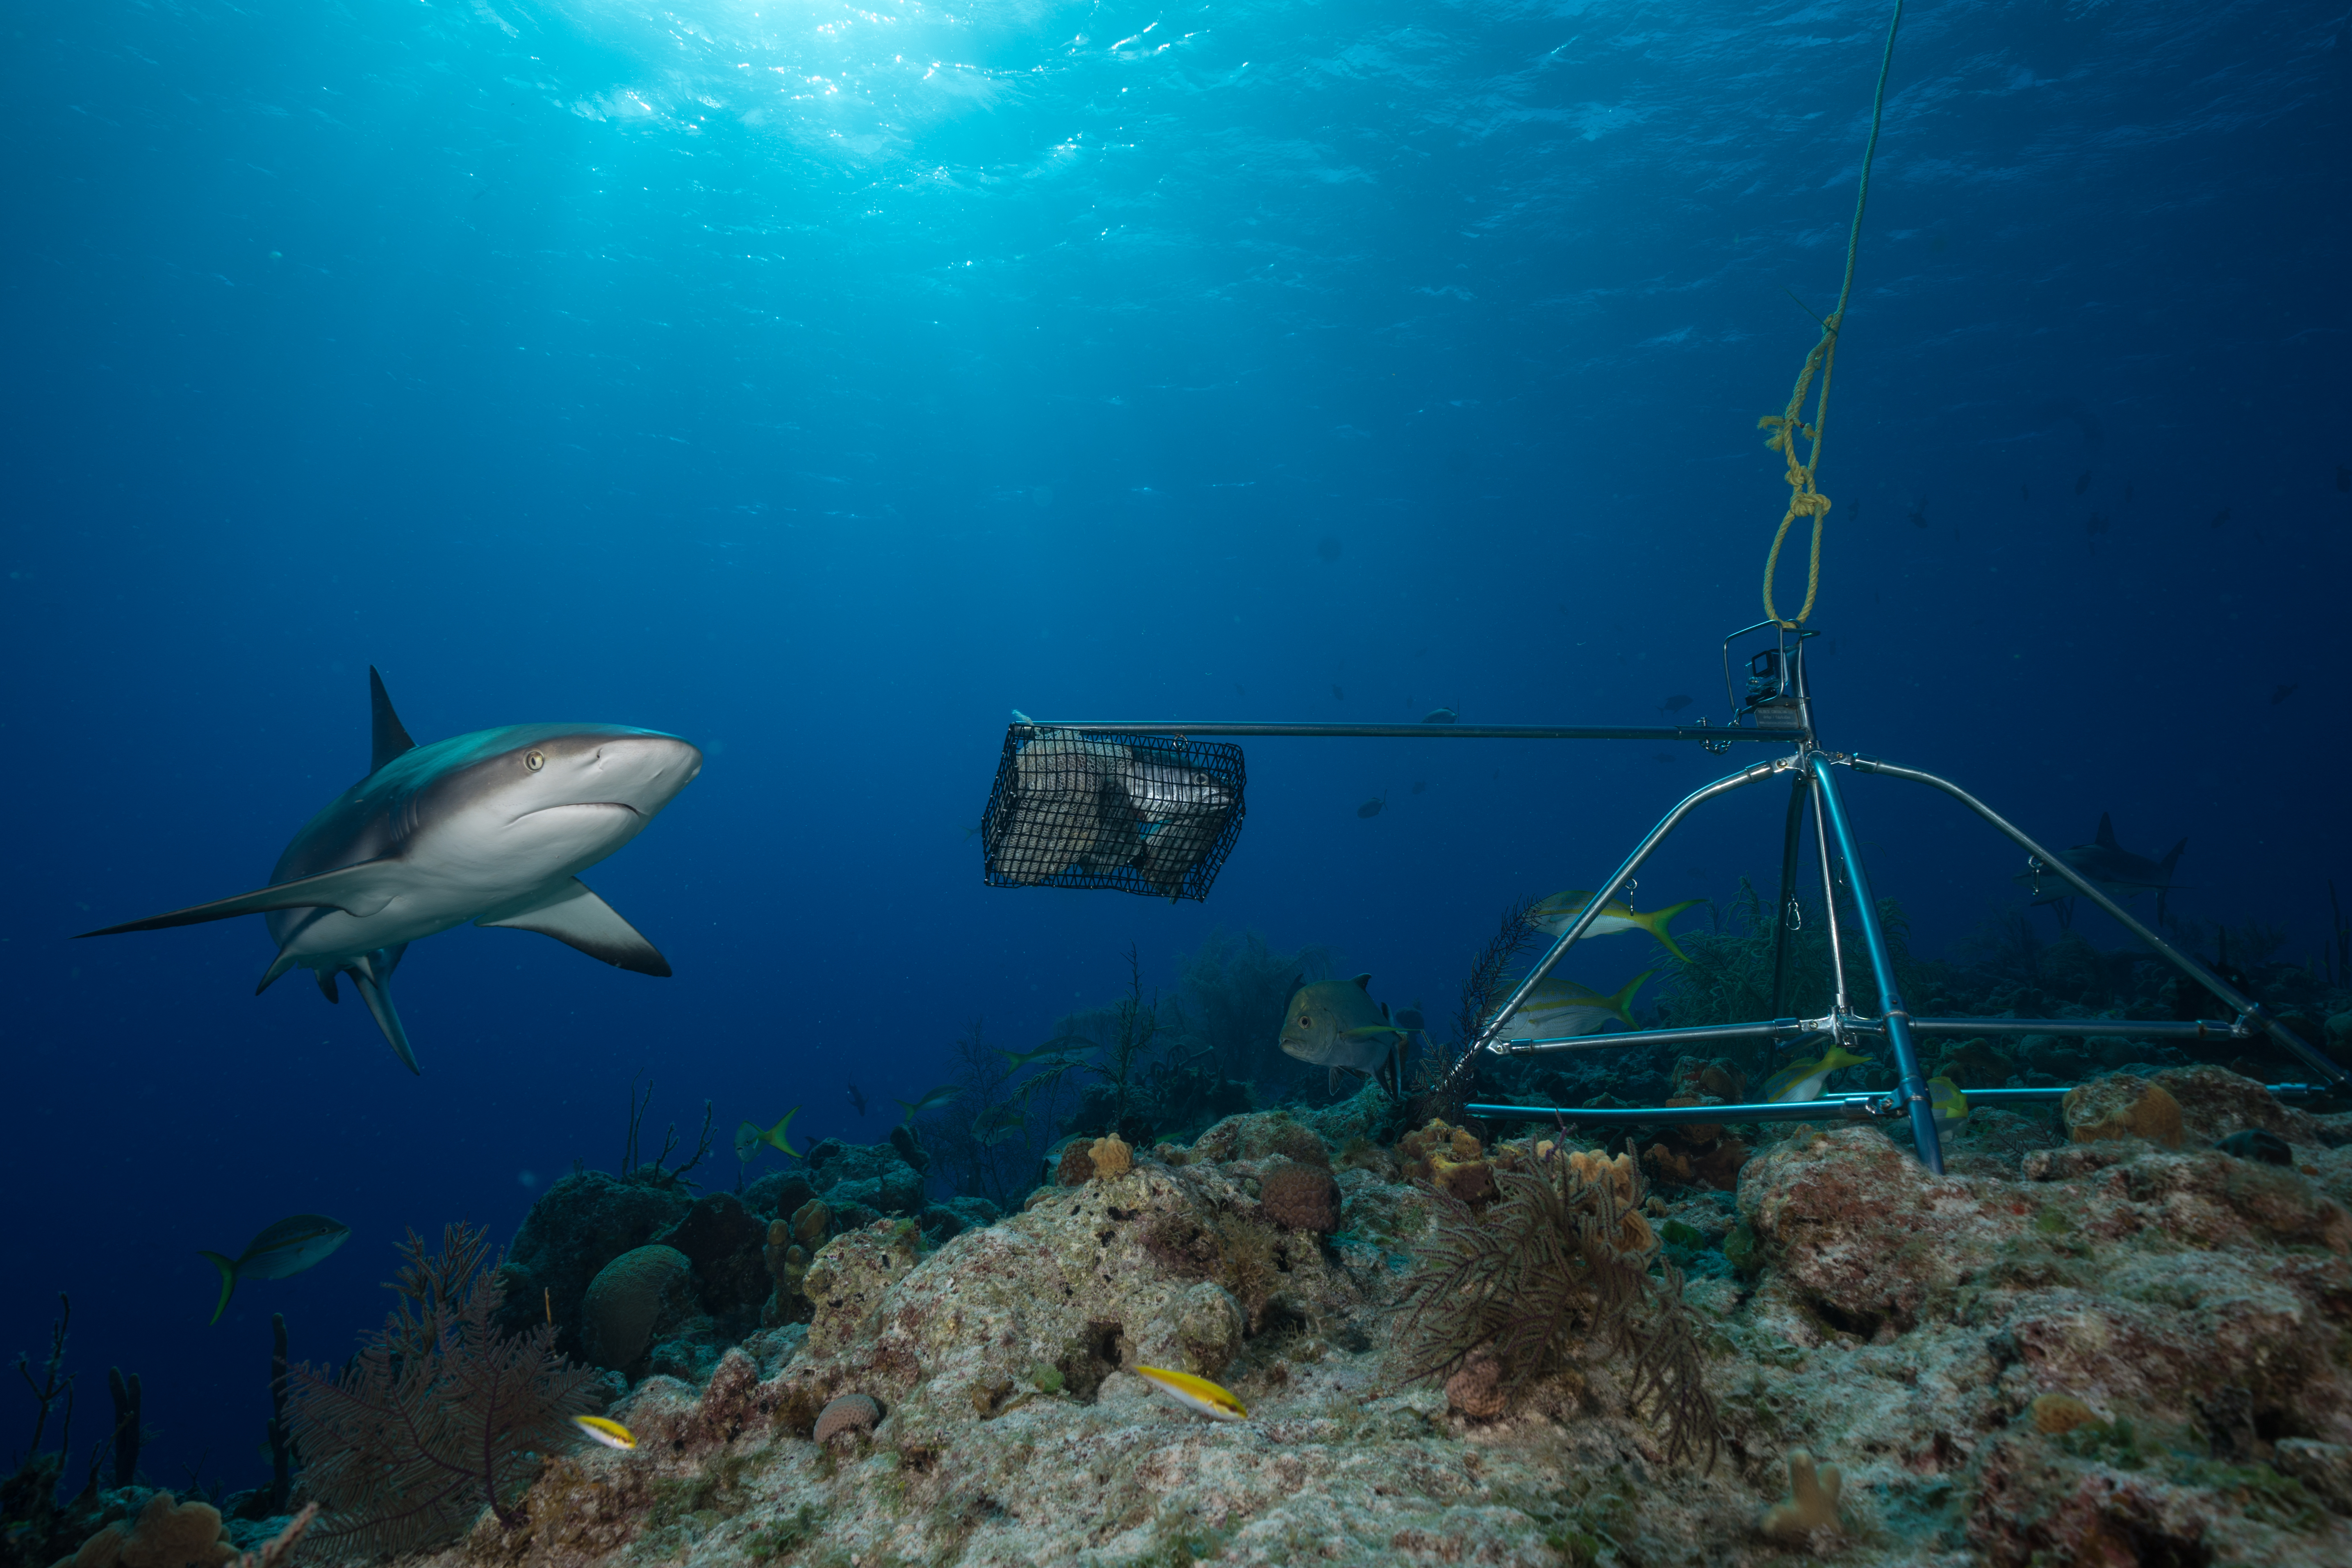 How does overfishing affect sharks and rays? - Save Our Seas Foundation